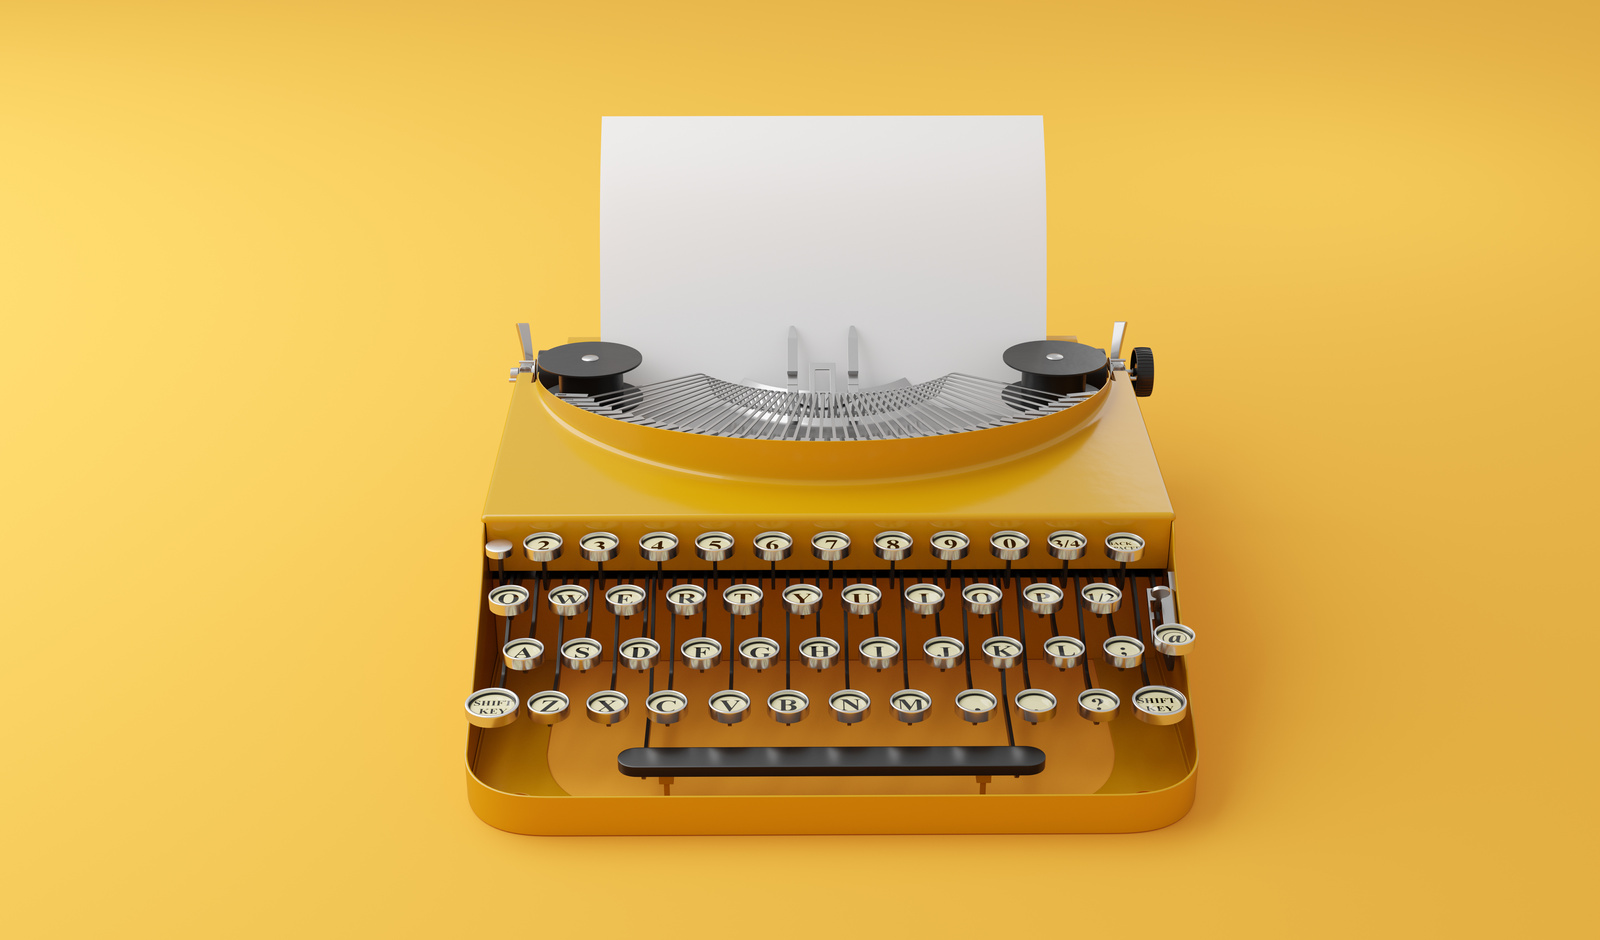 Retro vintage typewriter in single color style